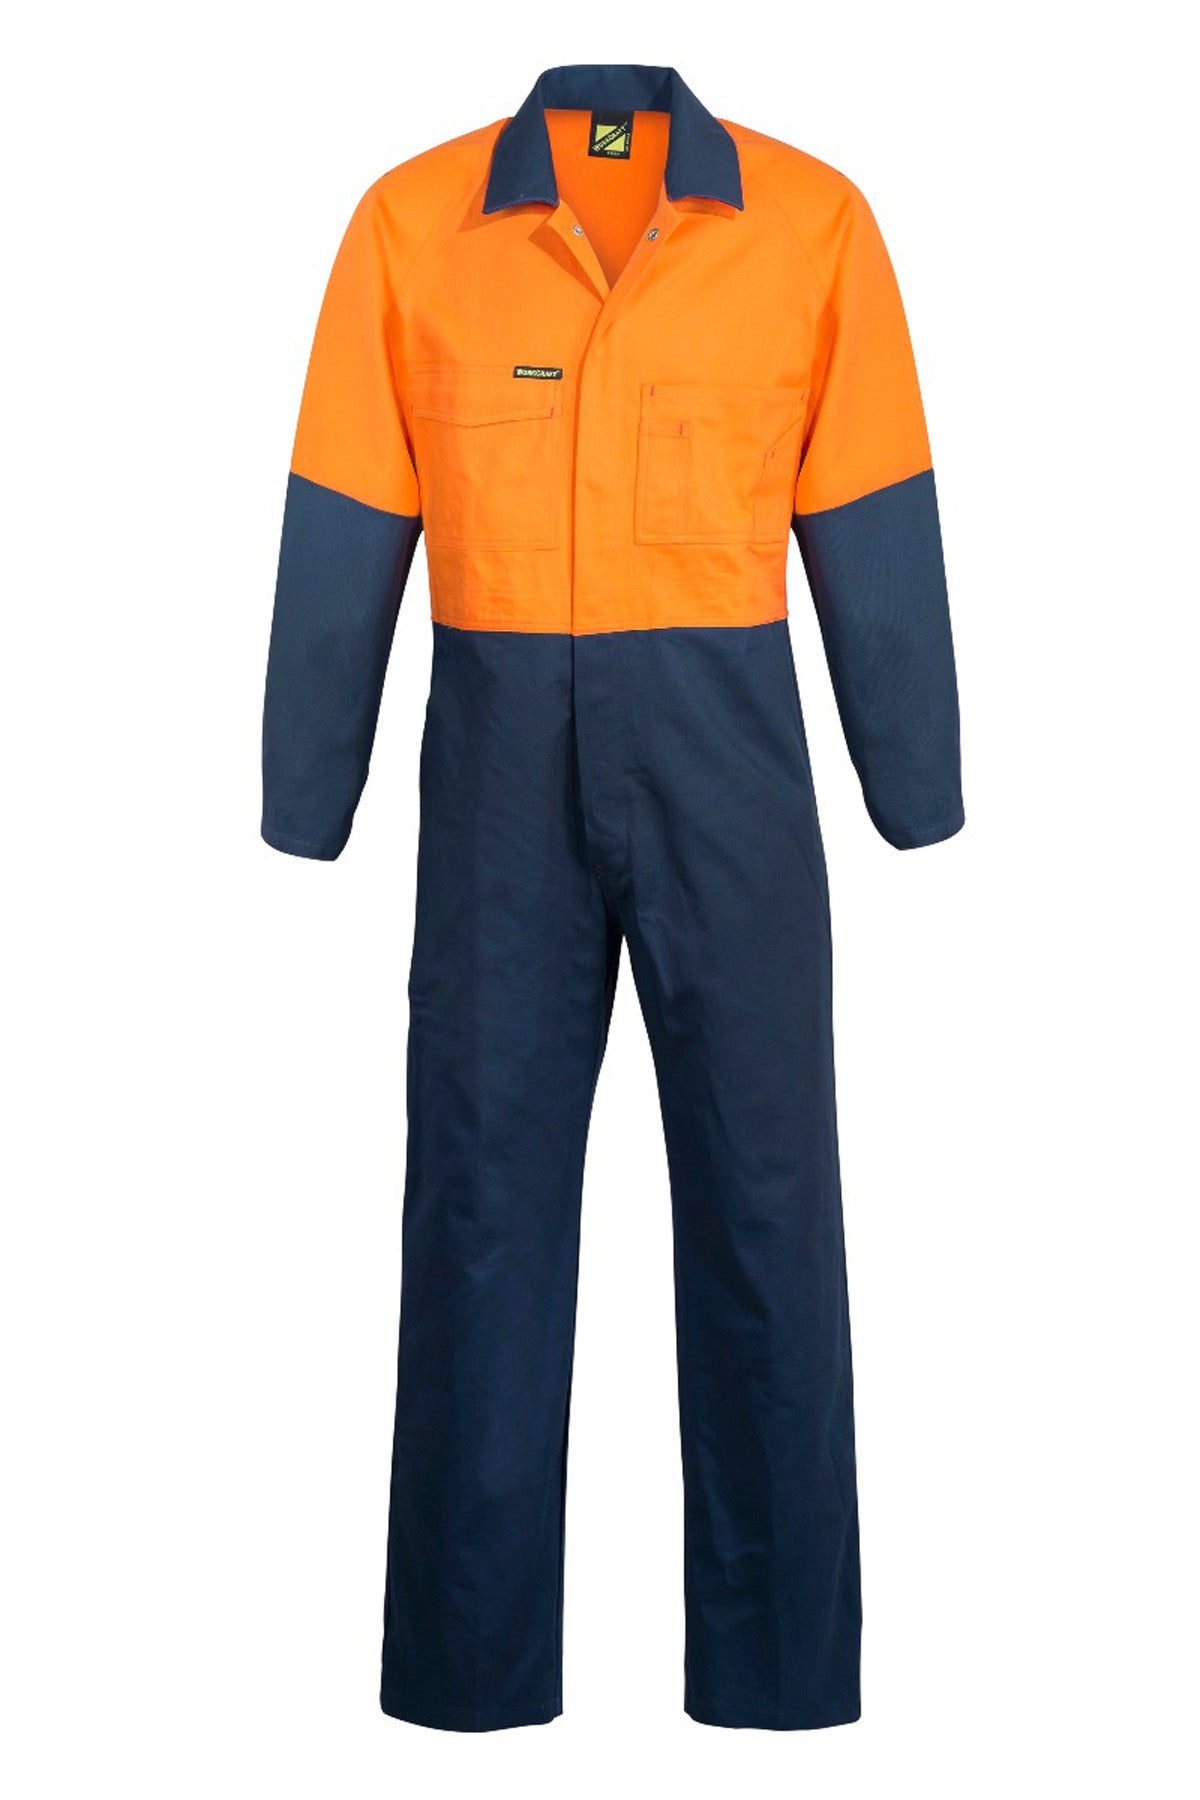 Workcraft WC3051 Hi-Vis Two Tone Cotton Drill Overalls